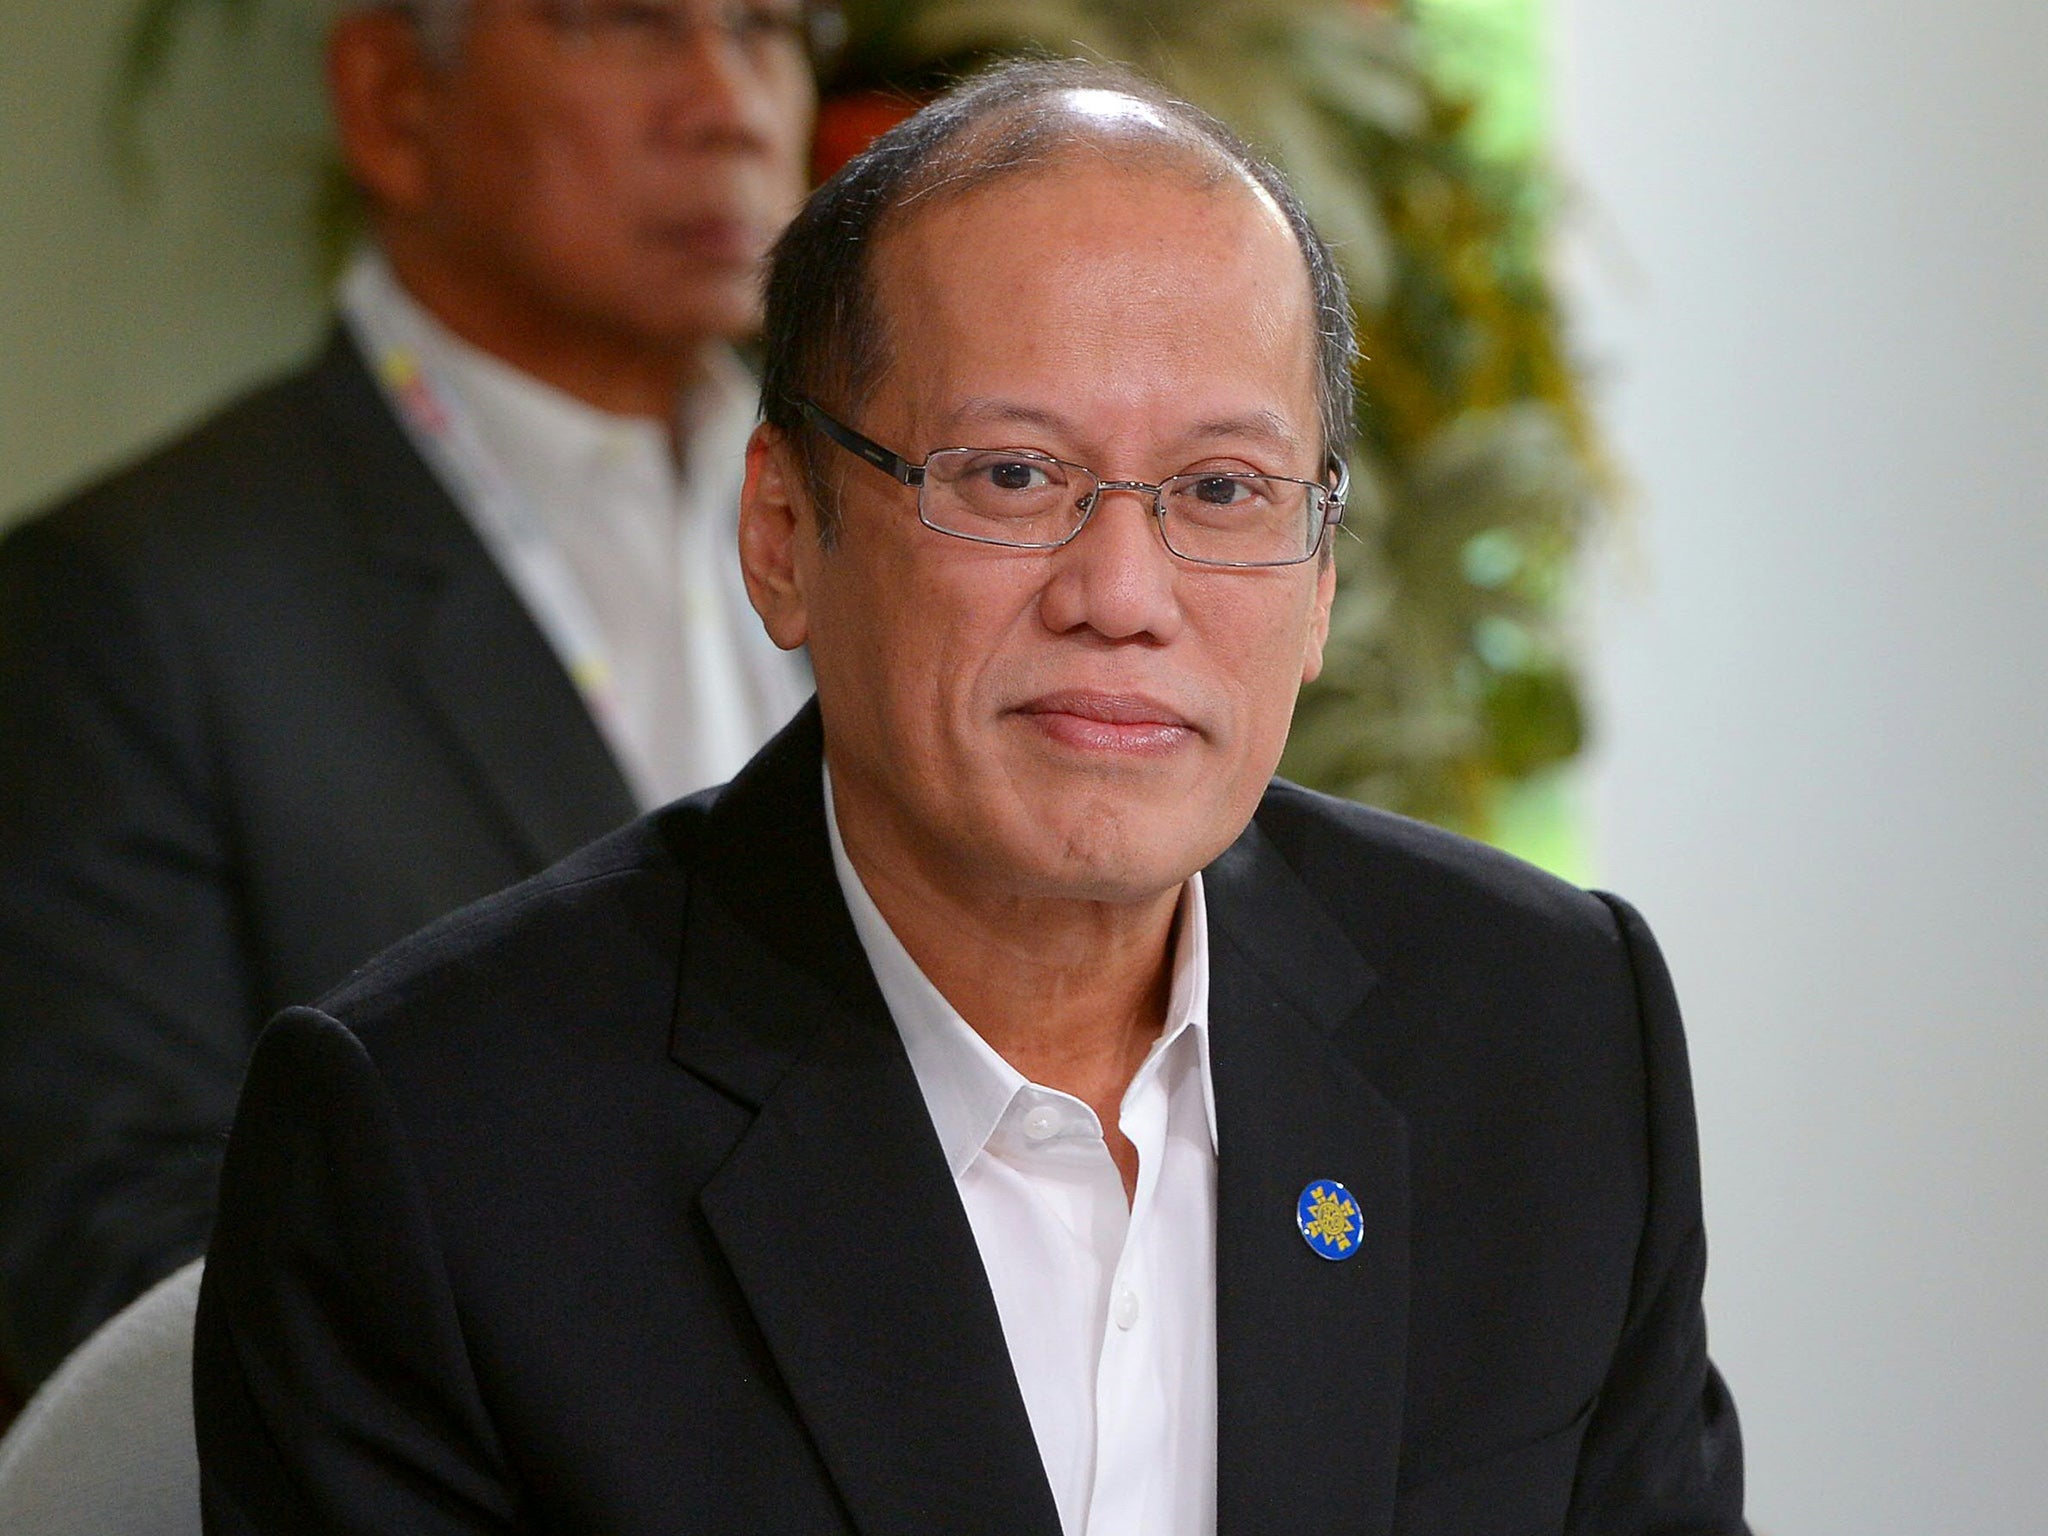 Aquino's six-year term as president ends in June